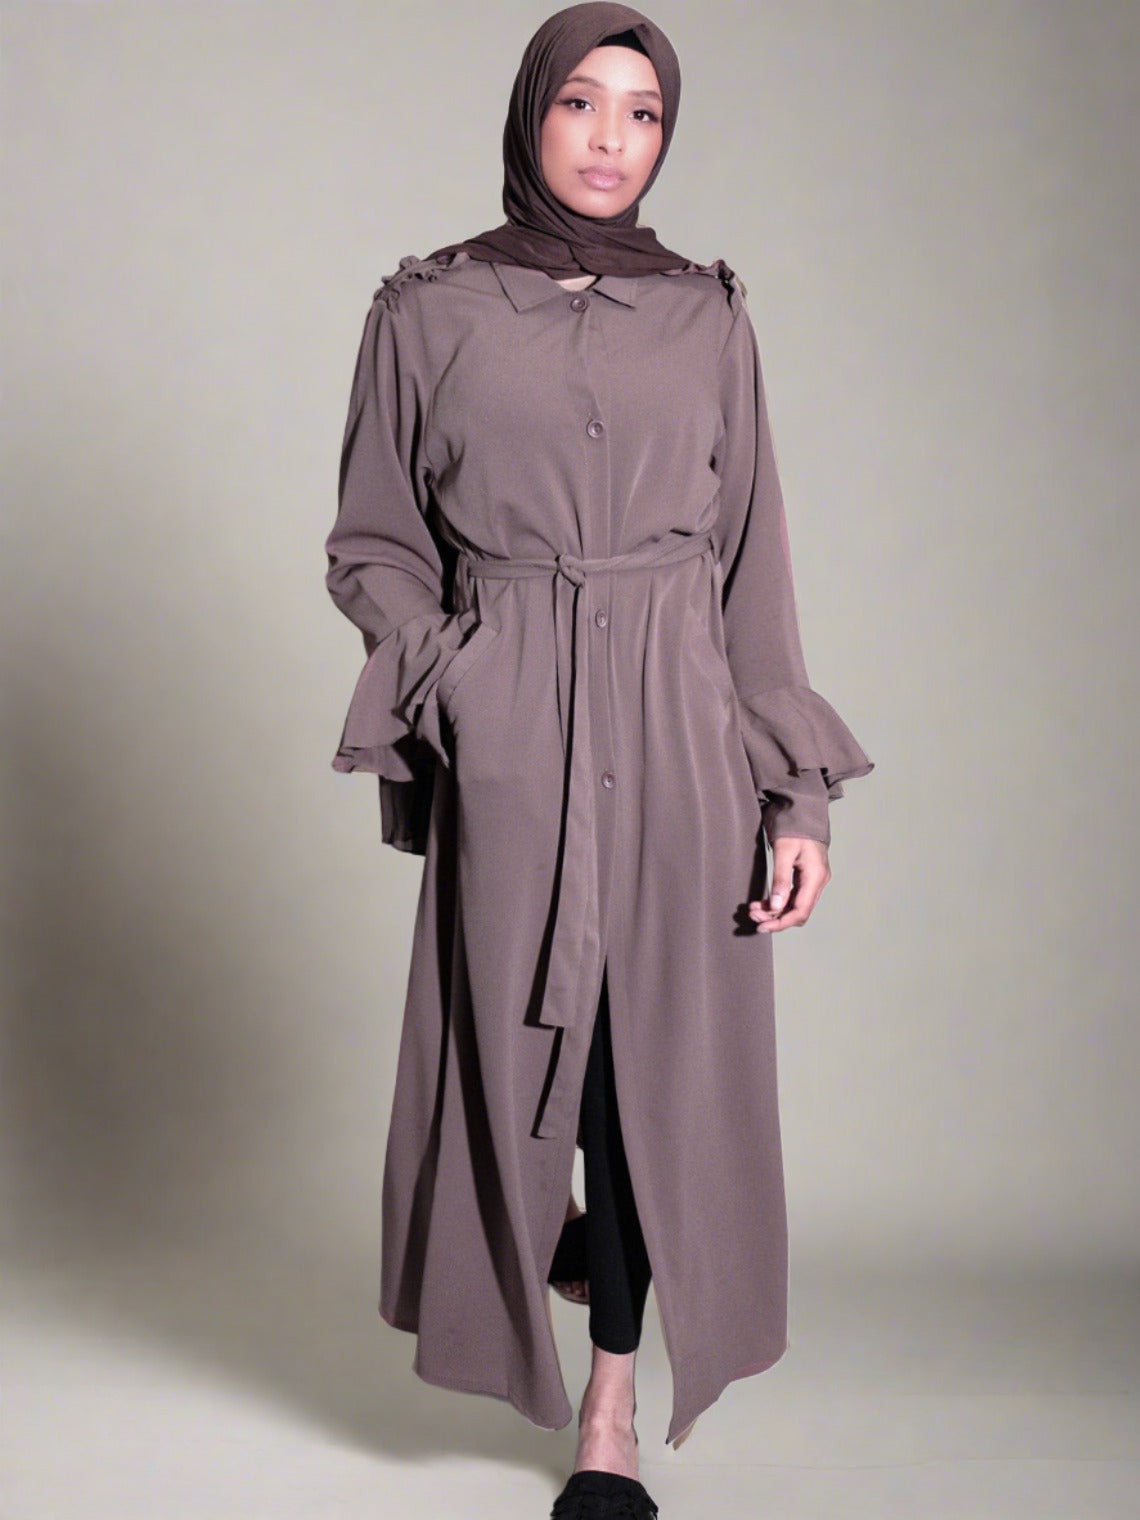 modest open abaya with extra arm room shirt style front button jacket. a modest fashion must